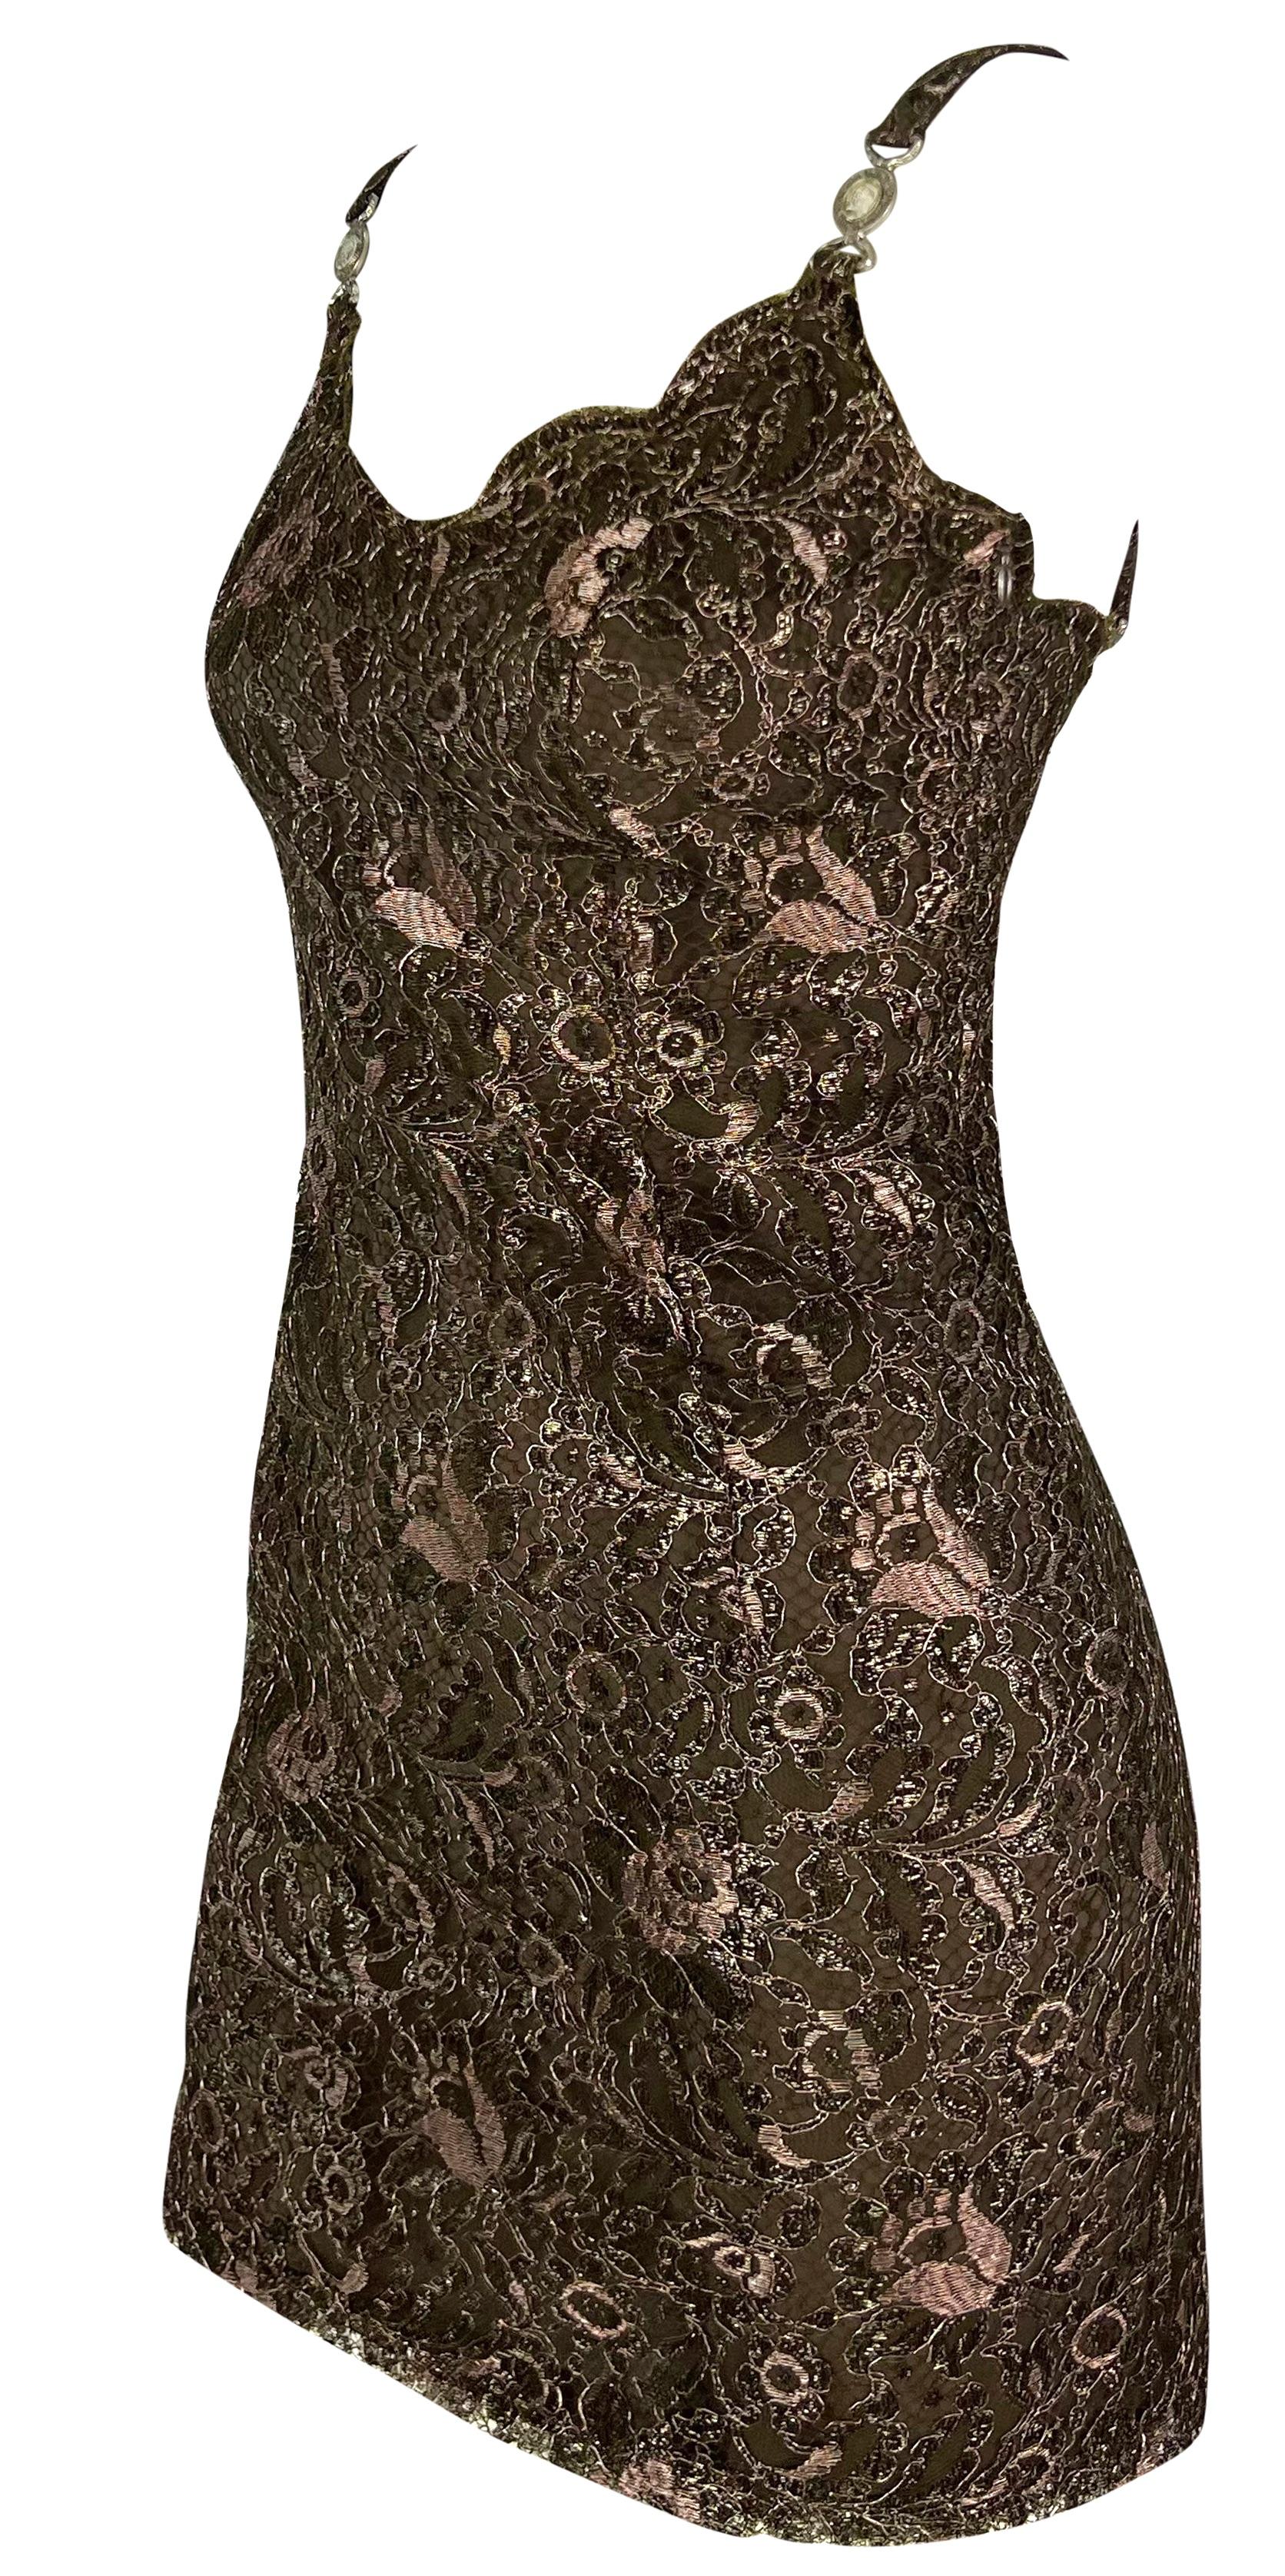 F/W 1996 Gianni Versace Couture Metallic Brown Floral Lace Medusa Mini Dress In Excellent Condition For Sale In West Hollywood, CA